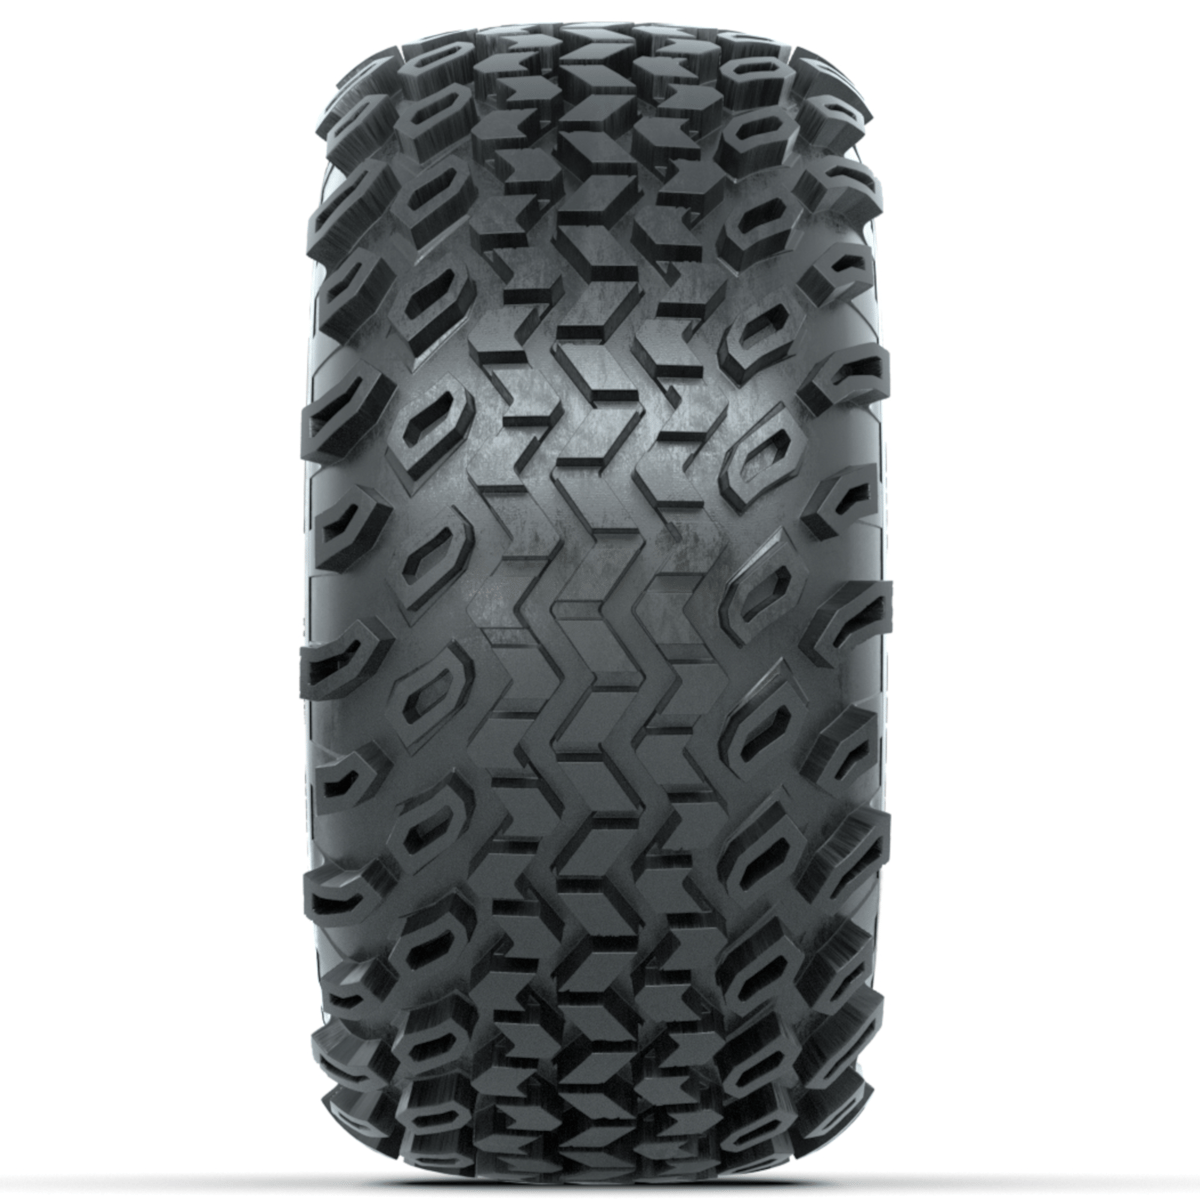 20x10-8 Duro Desert A/T Tire (Lift Required)